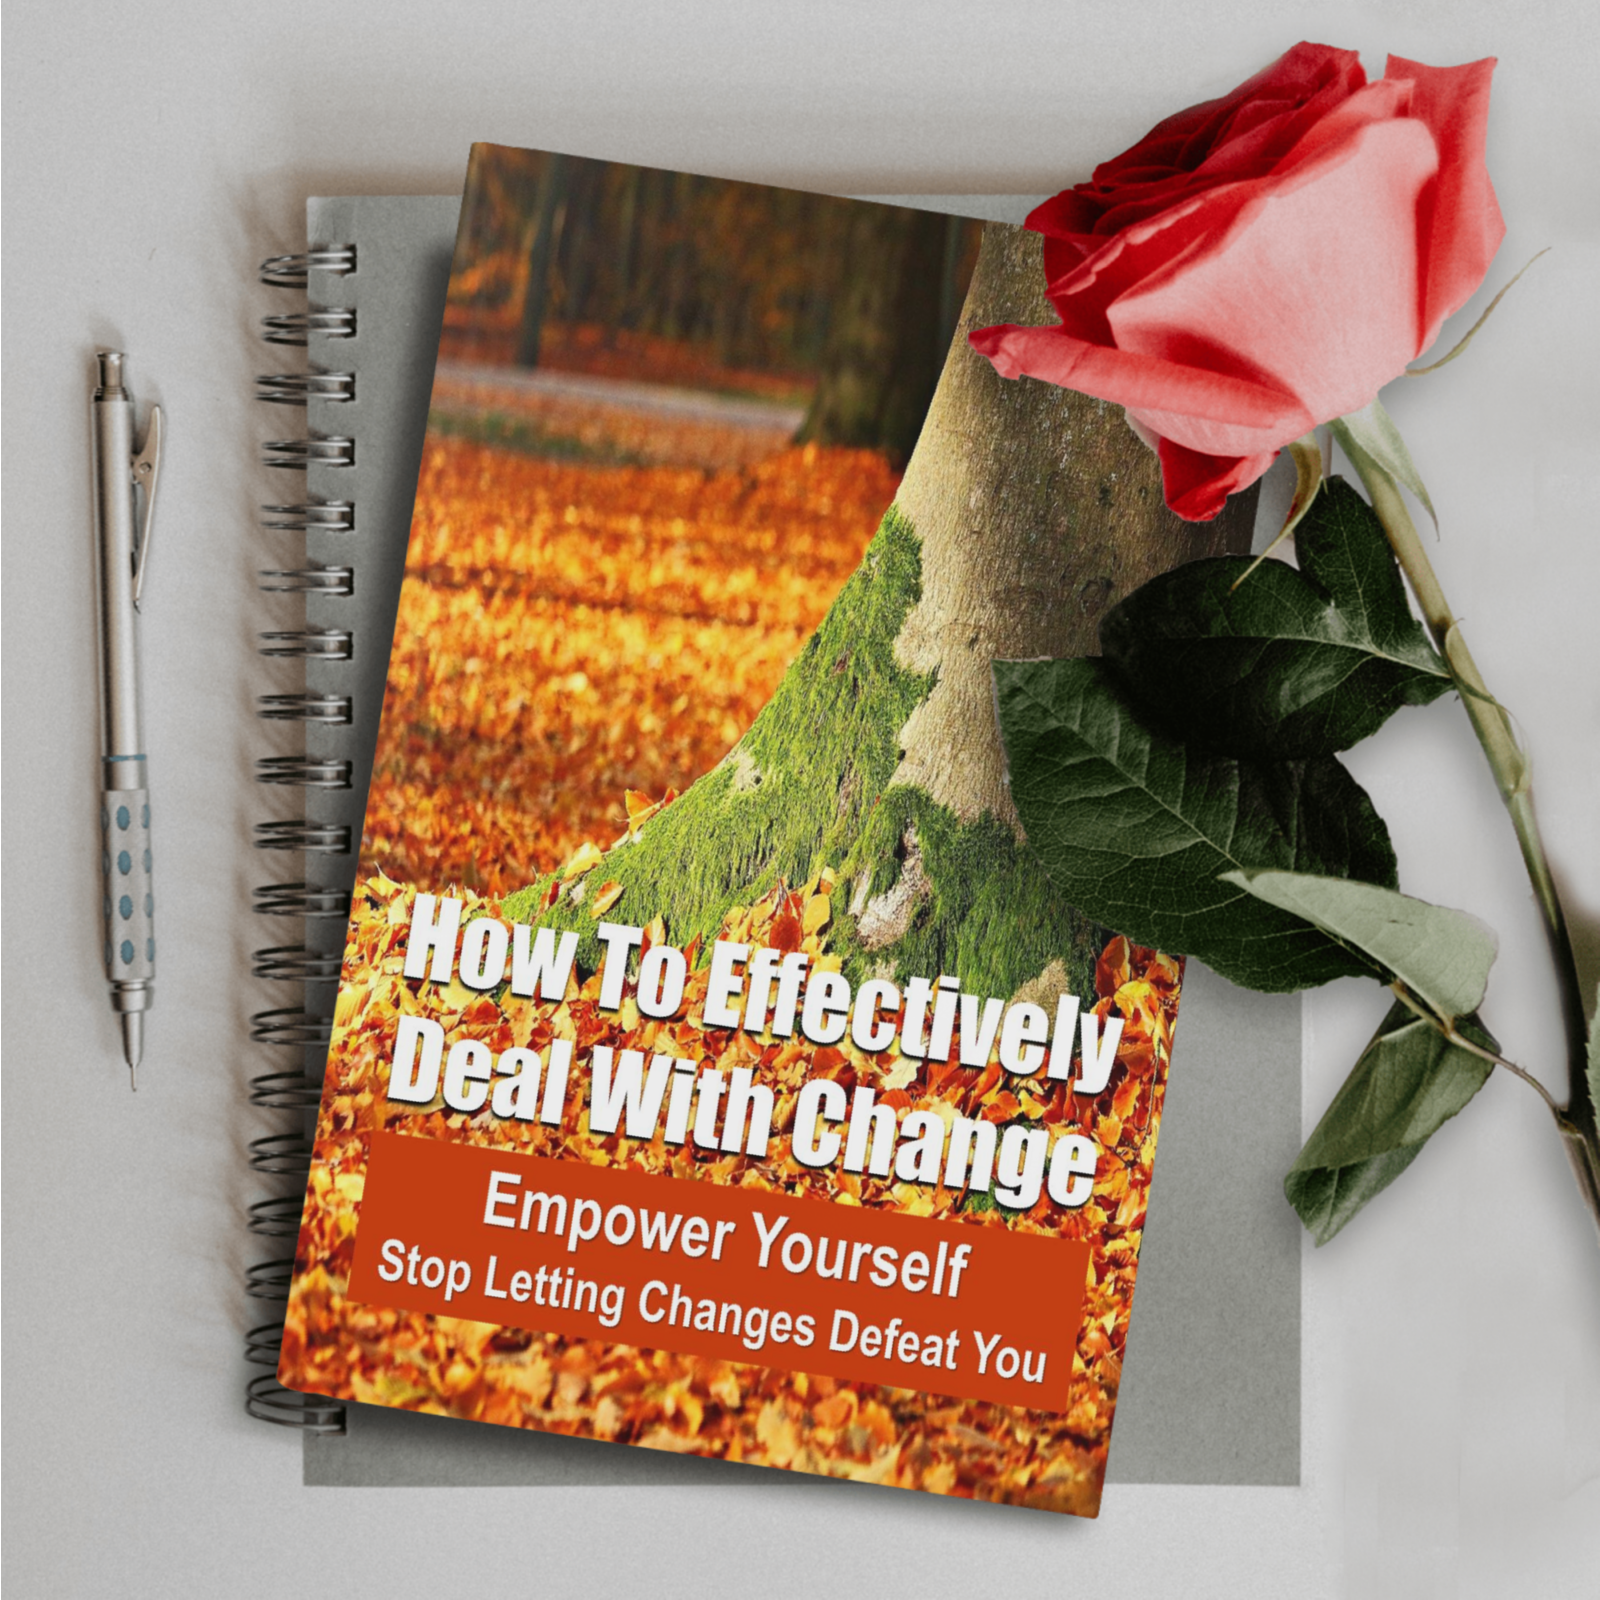 How to effectively deal with change ebook with a red rose, ballpoint pen and notebook in the background